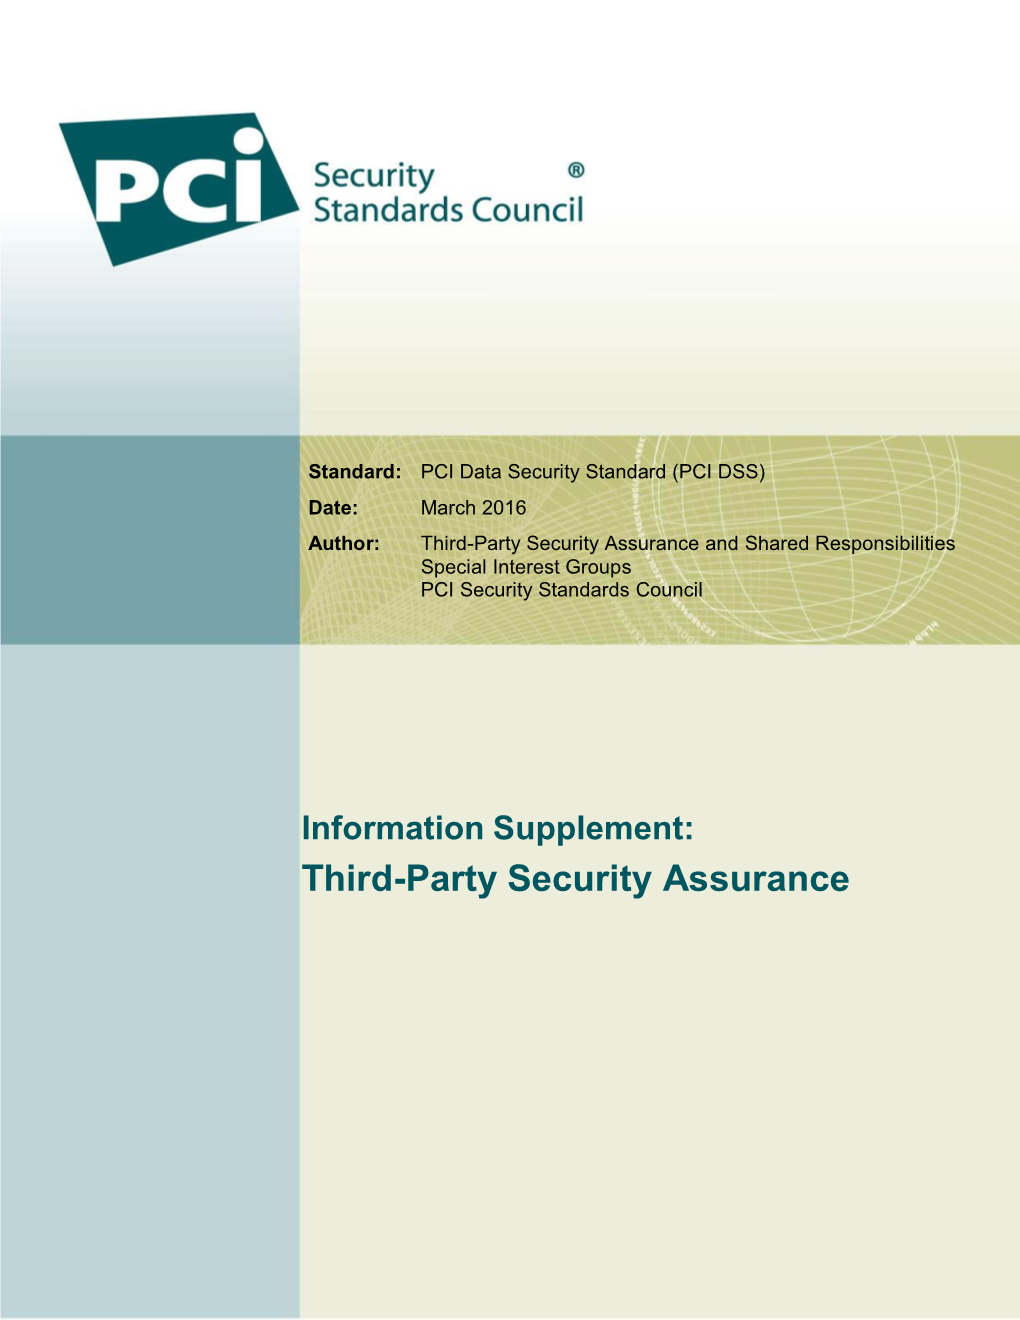 Information Supplement: Third-Party Security Assurance